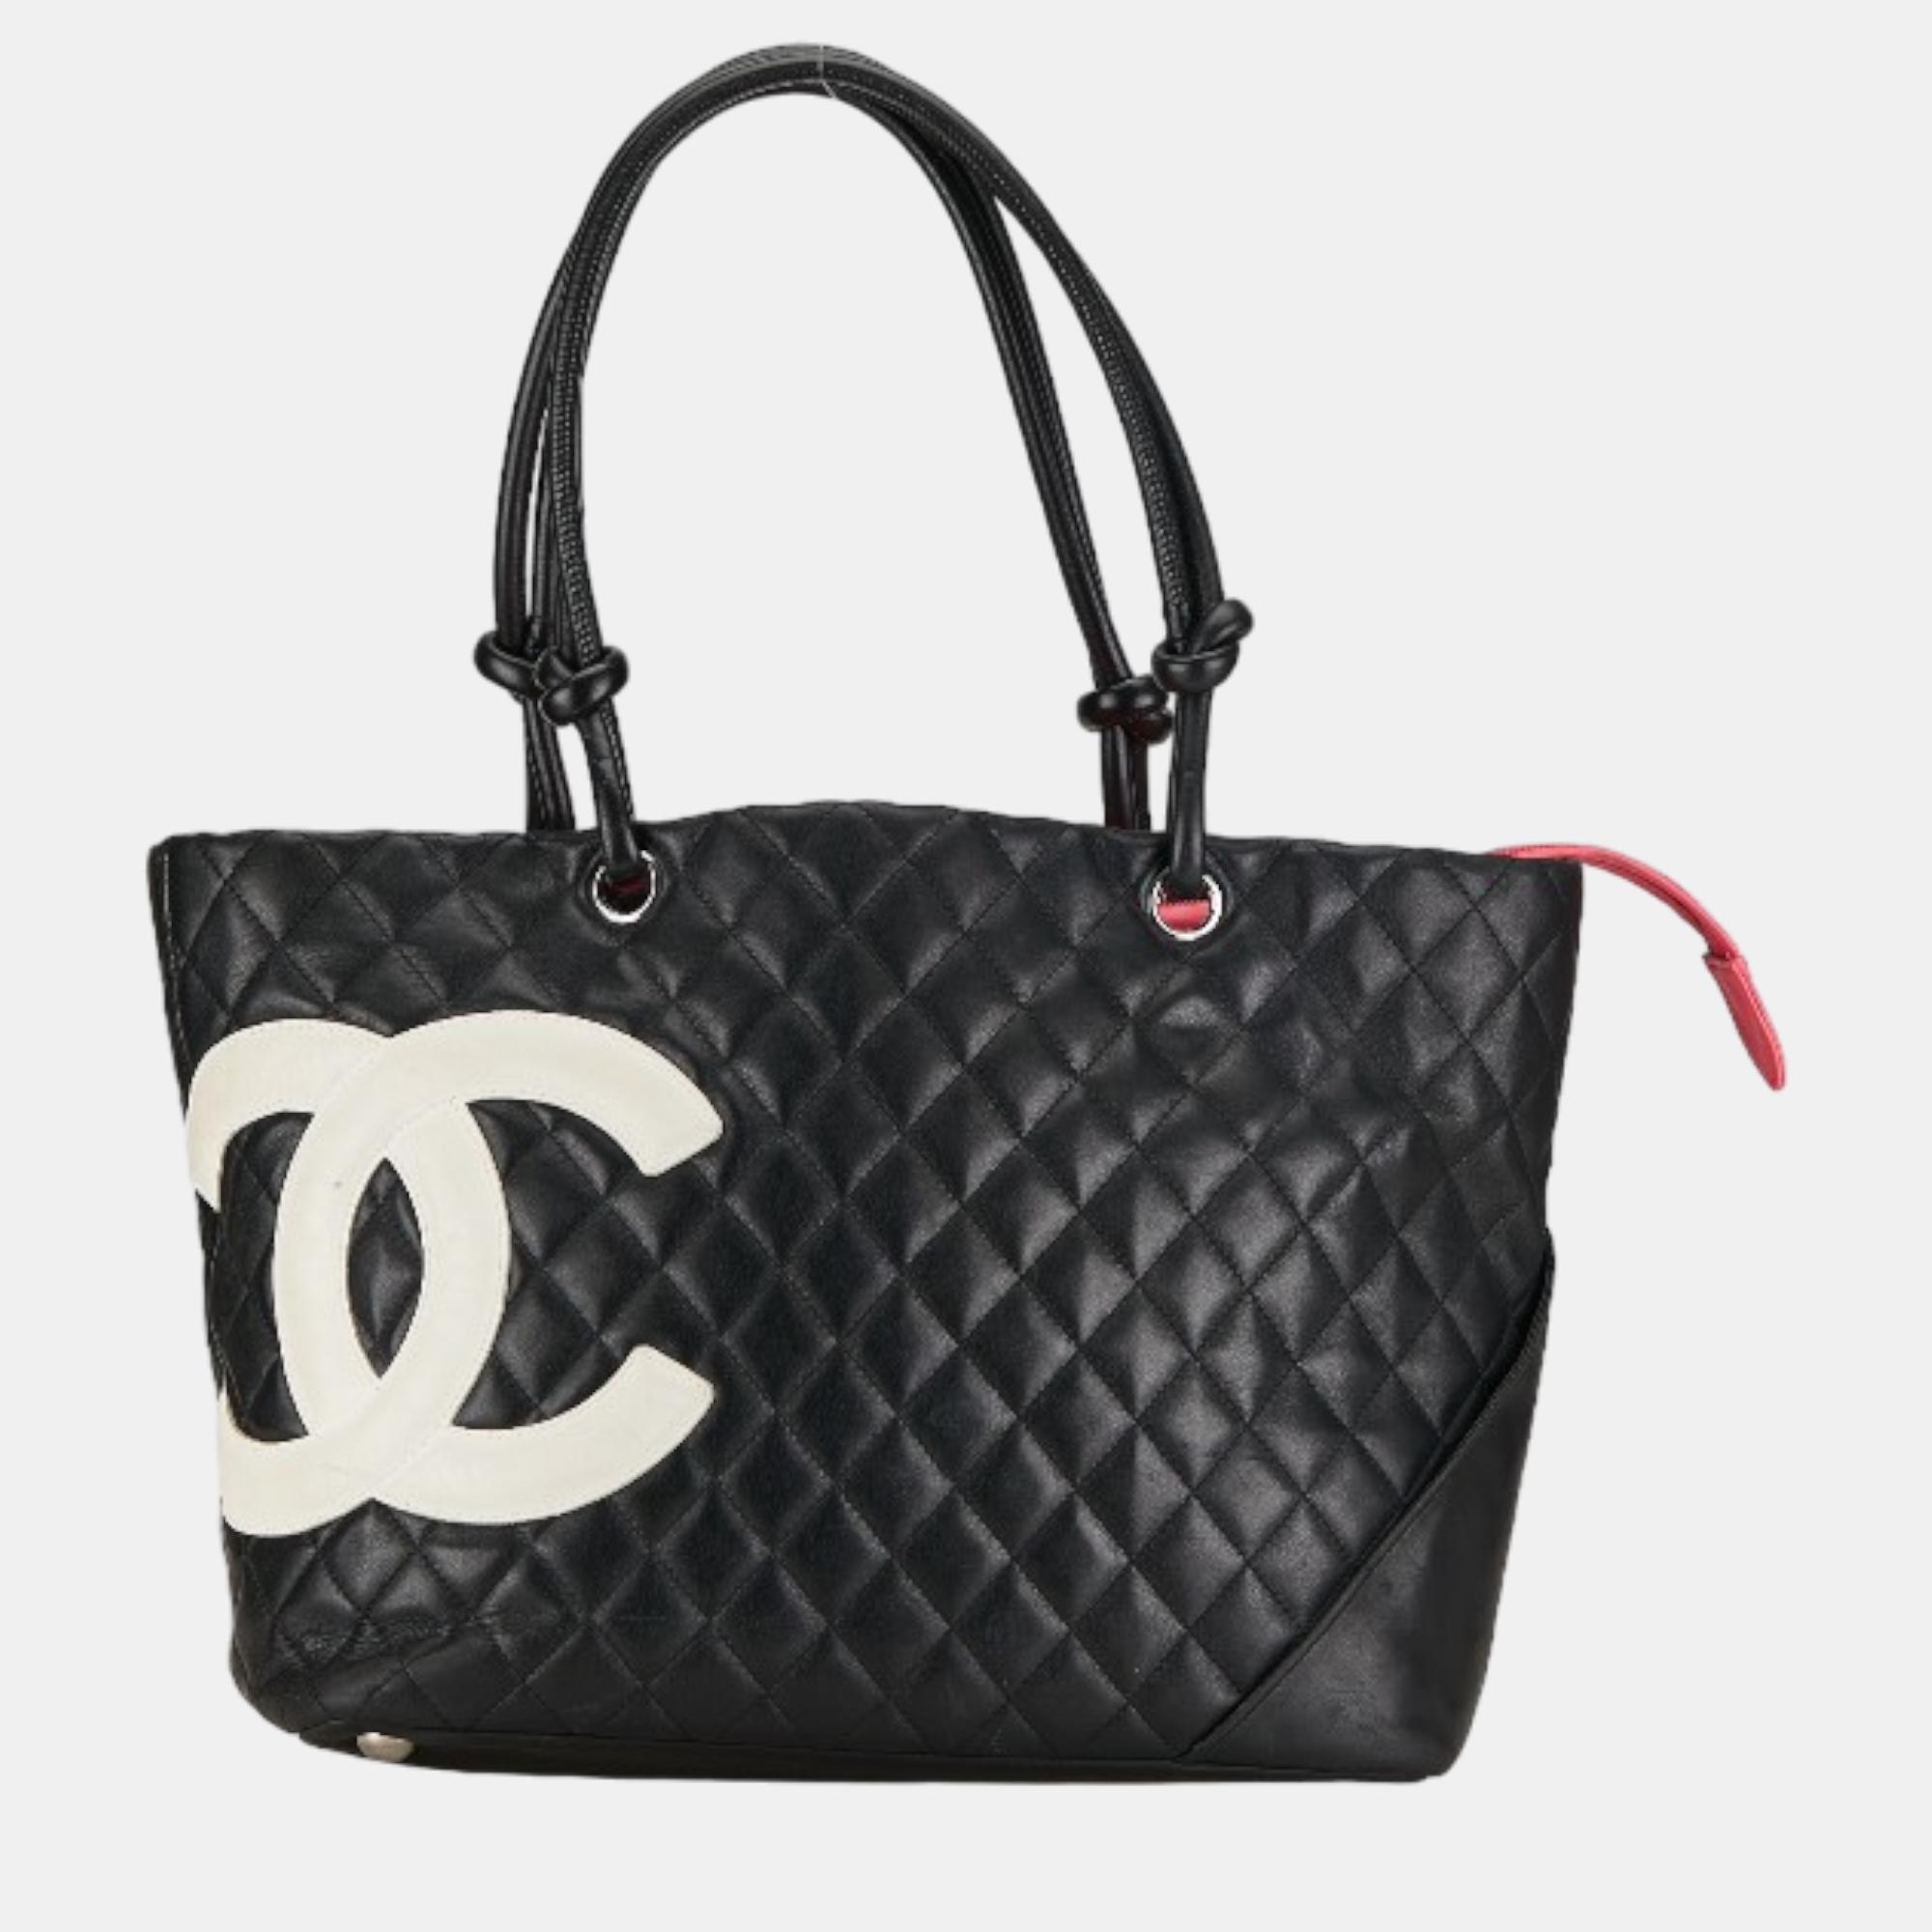 Chanel black quilted leather cambon tote bag